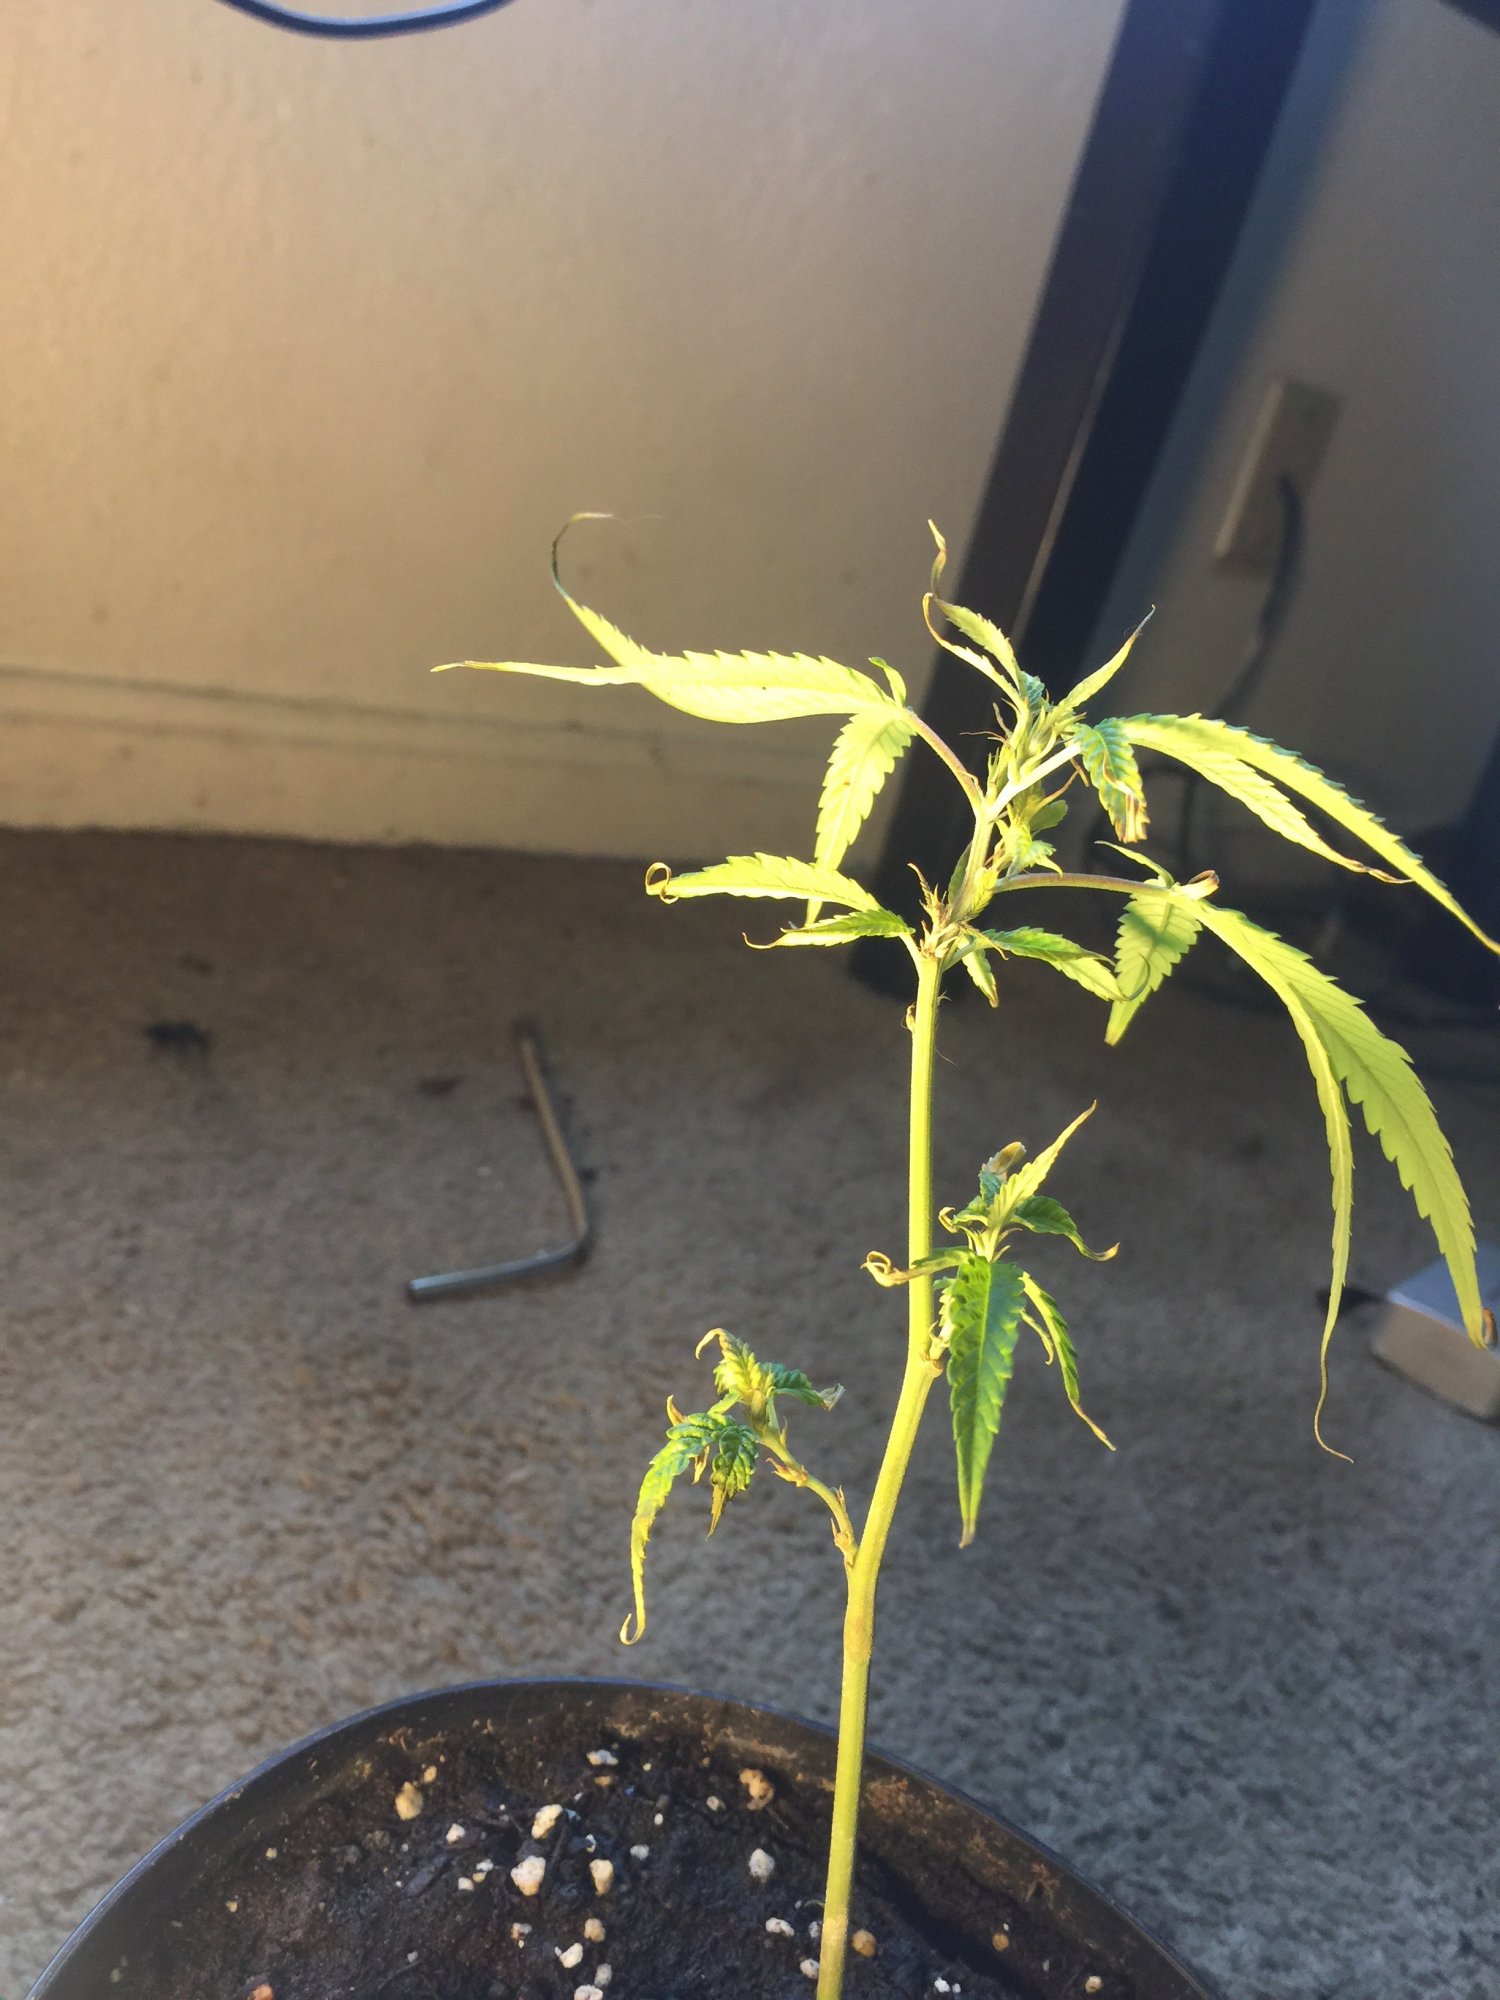 Please give me advice about my clones that are dying 2